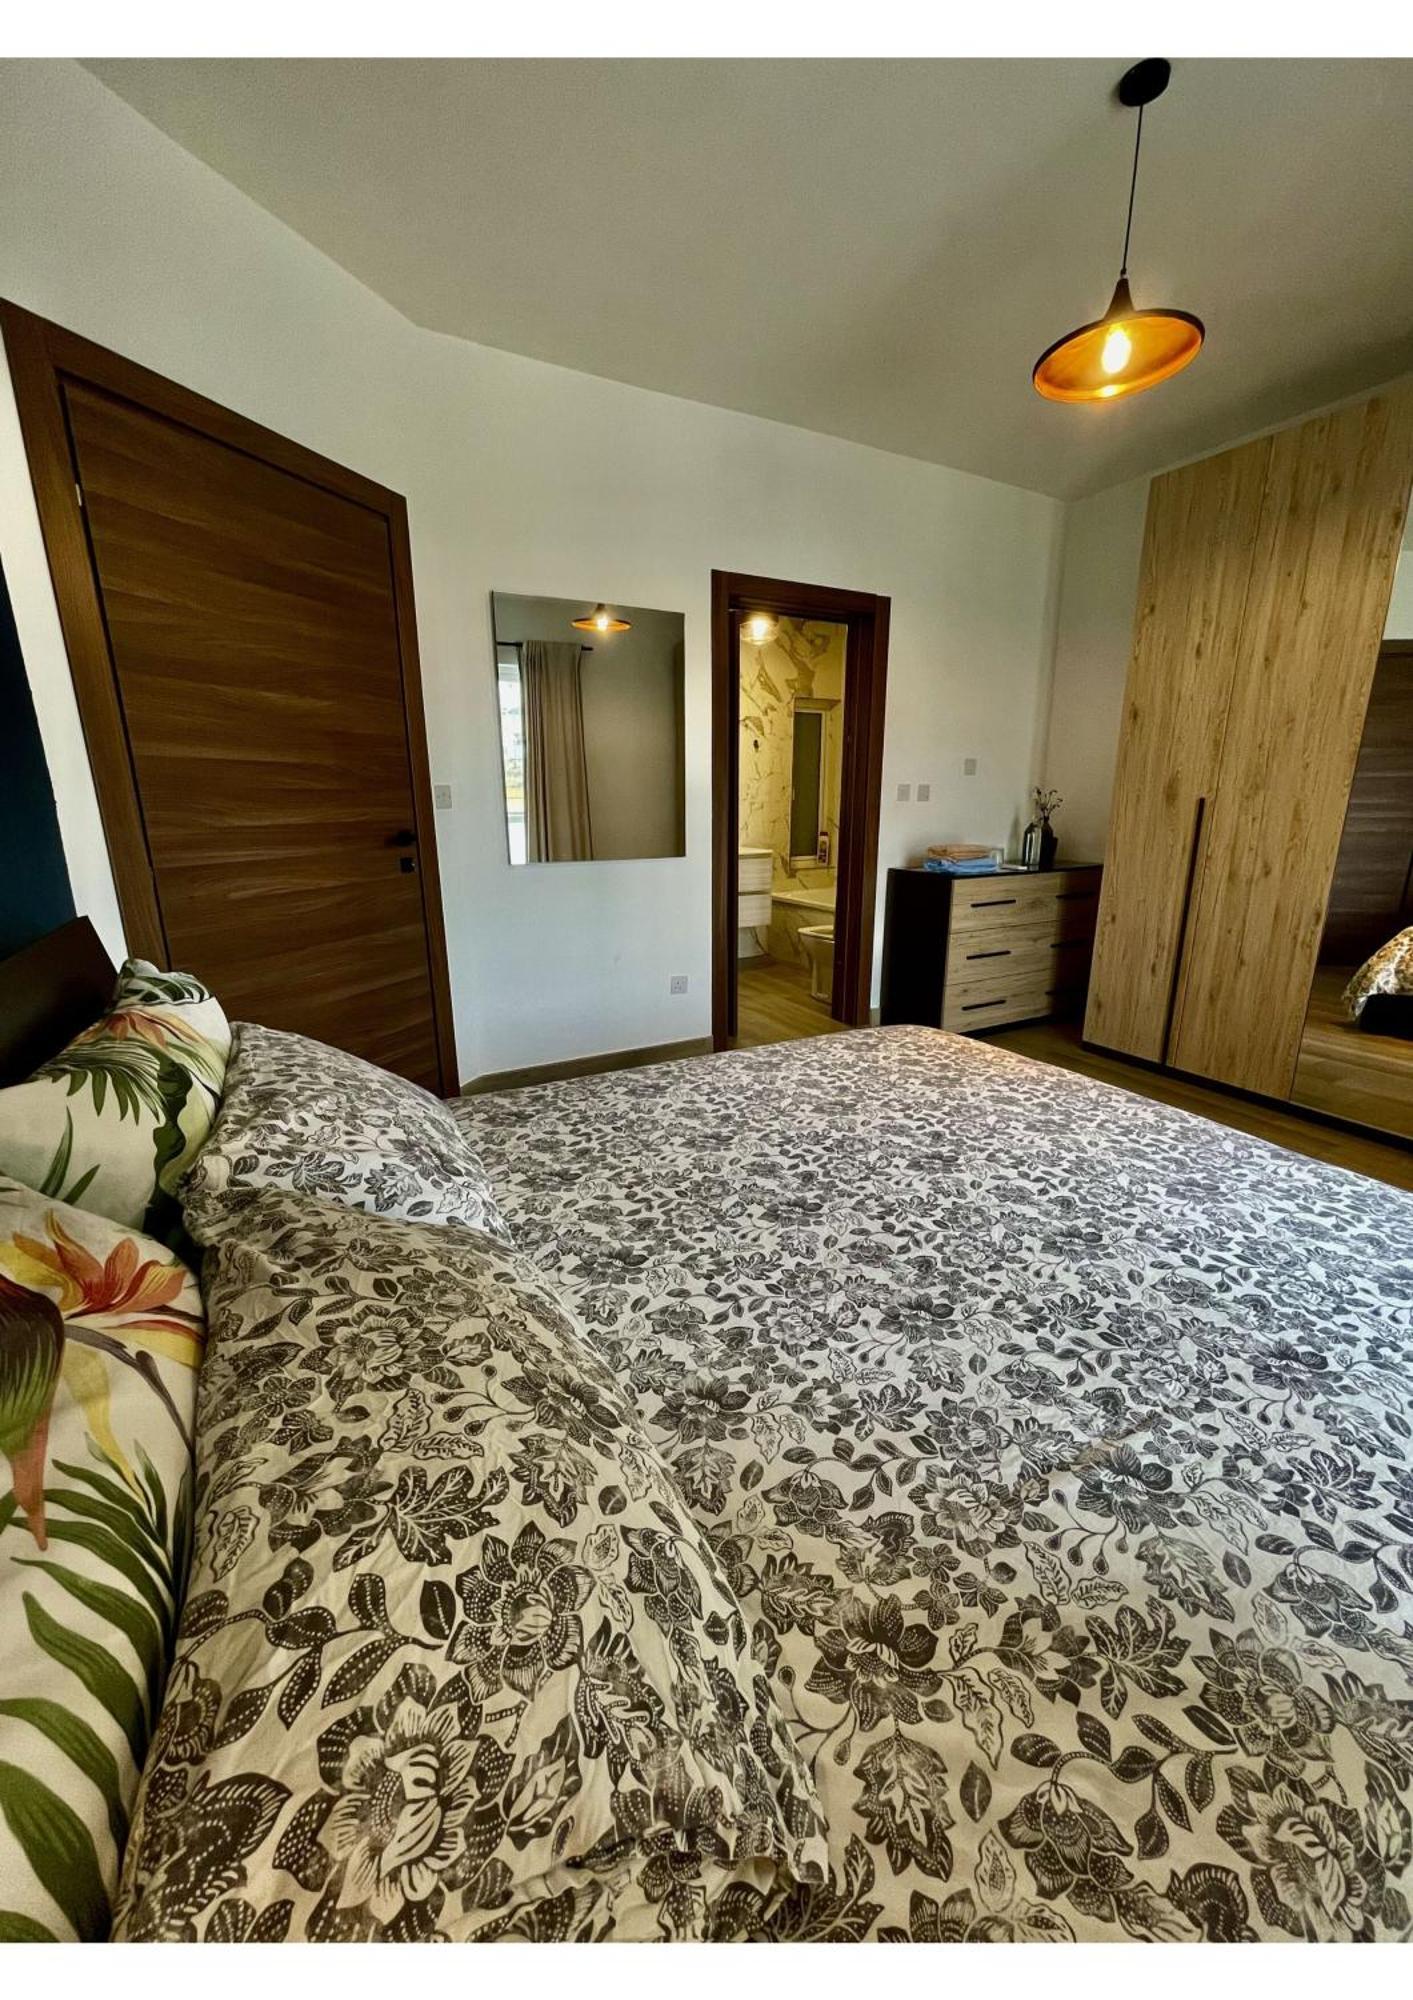 Airport Accommodation Bedroom With Bathroom Self Check In And Self Check Out Air-Condition Included Mqabba Εξωτερικό φωτογραφία